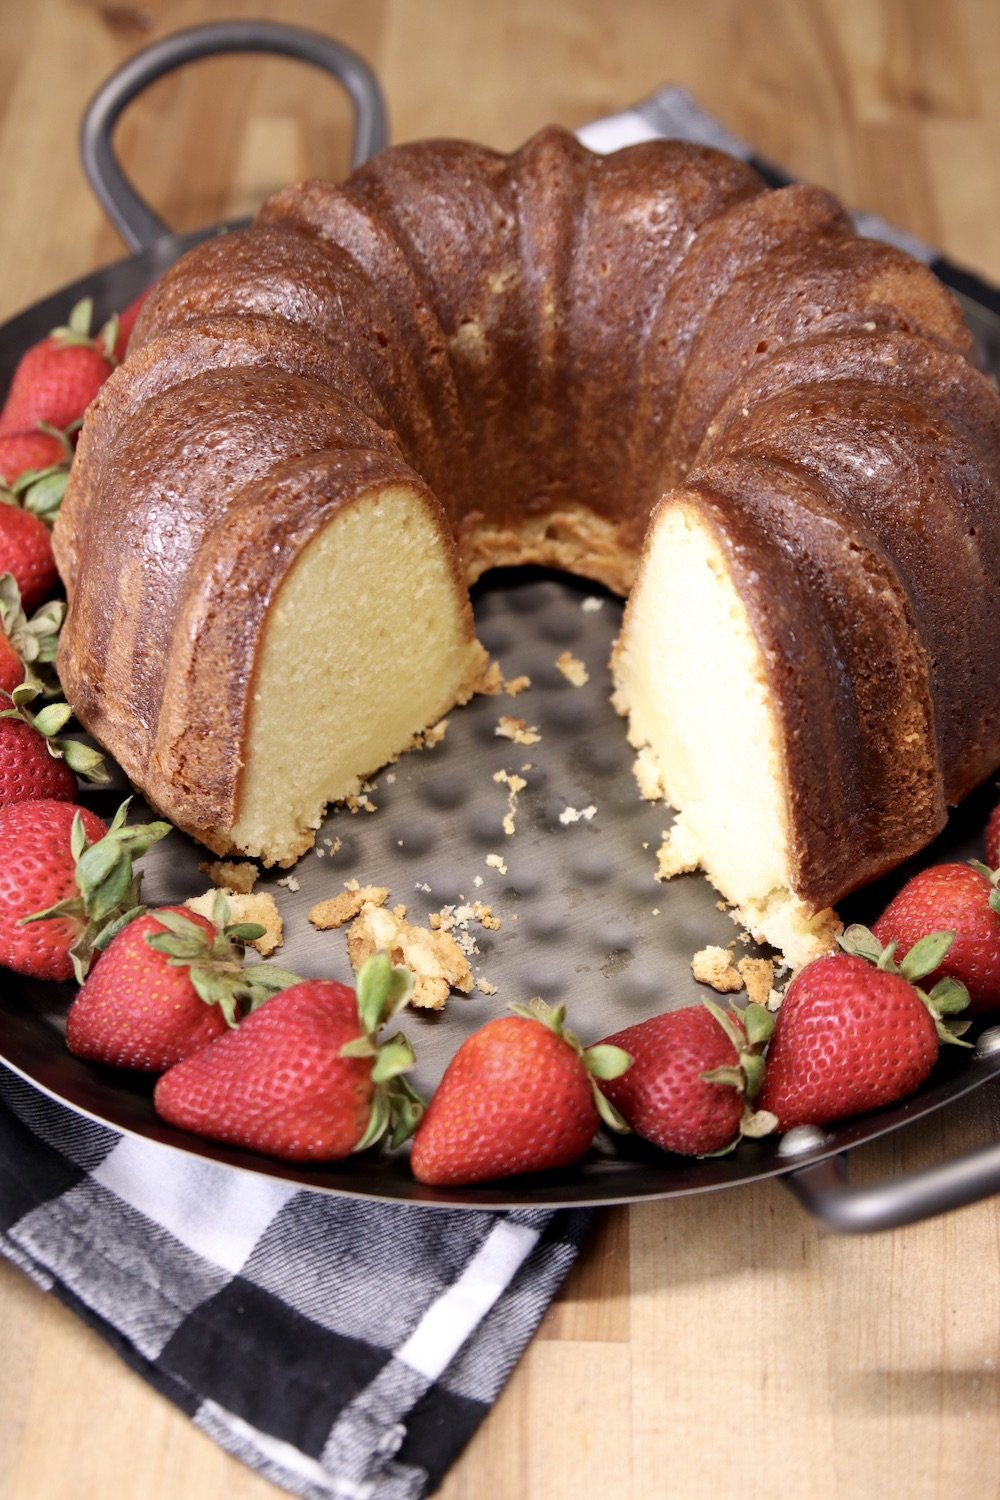 pound cake on a platter, 2 slices removed - strawberries surrounding cake